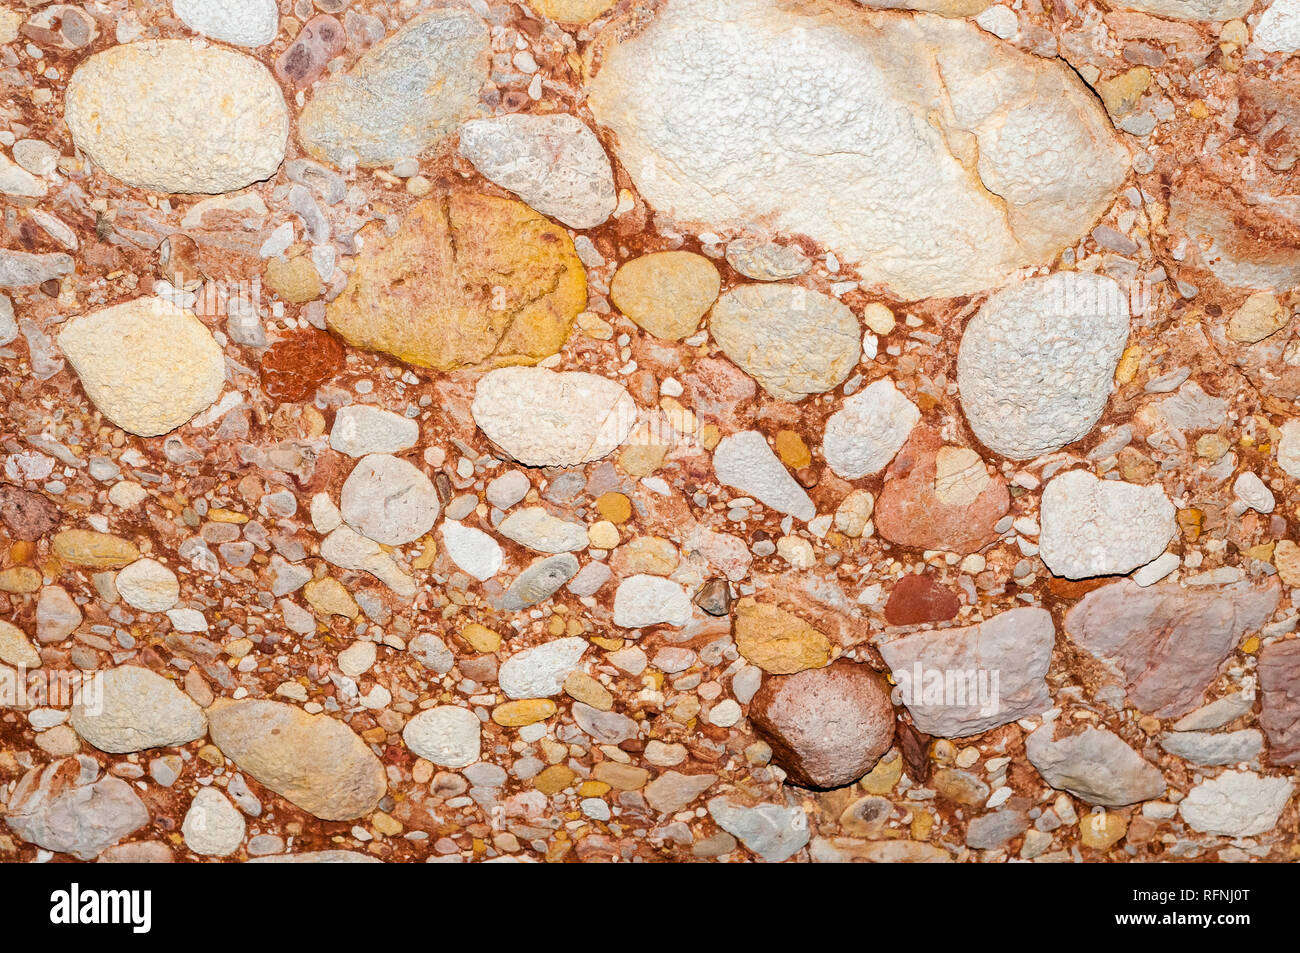 close-up view conglomerate rock inside salnitre caves in Montserrat, Collbató, Catalonia, Spain Stock Photo